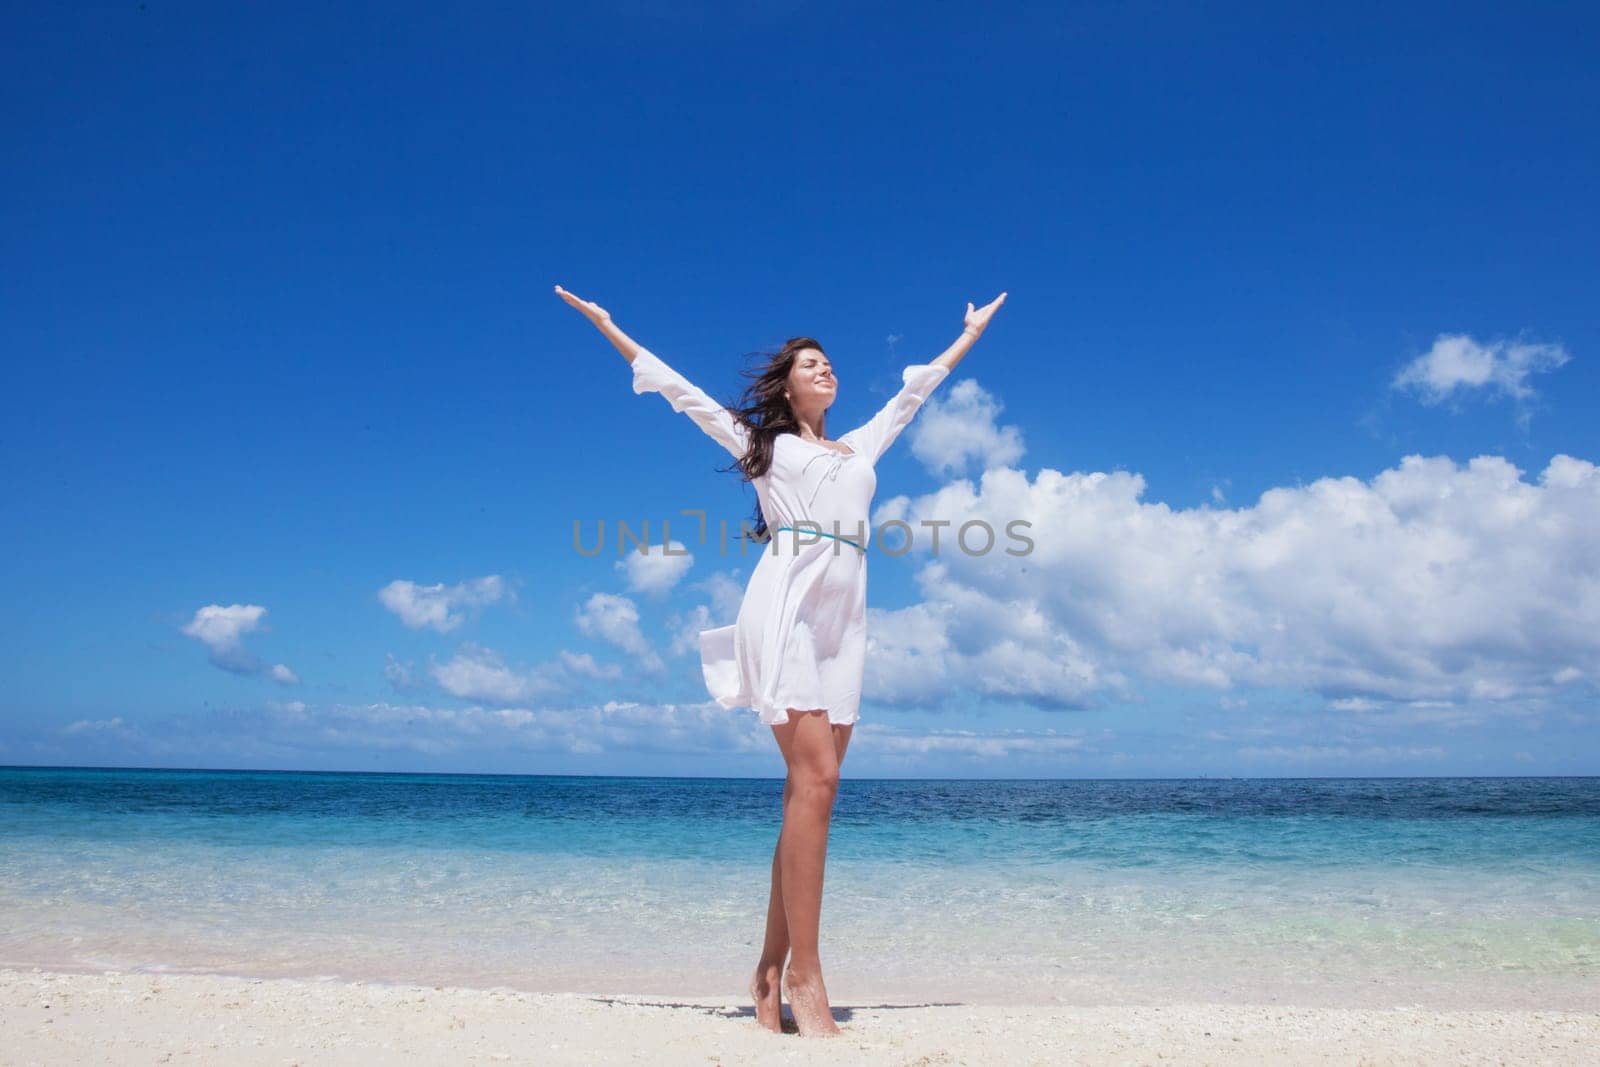 Woman in white dress posing in tropical sea beach with arms raised